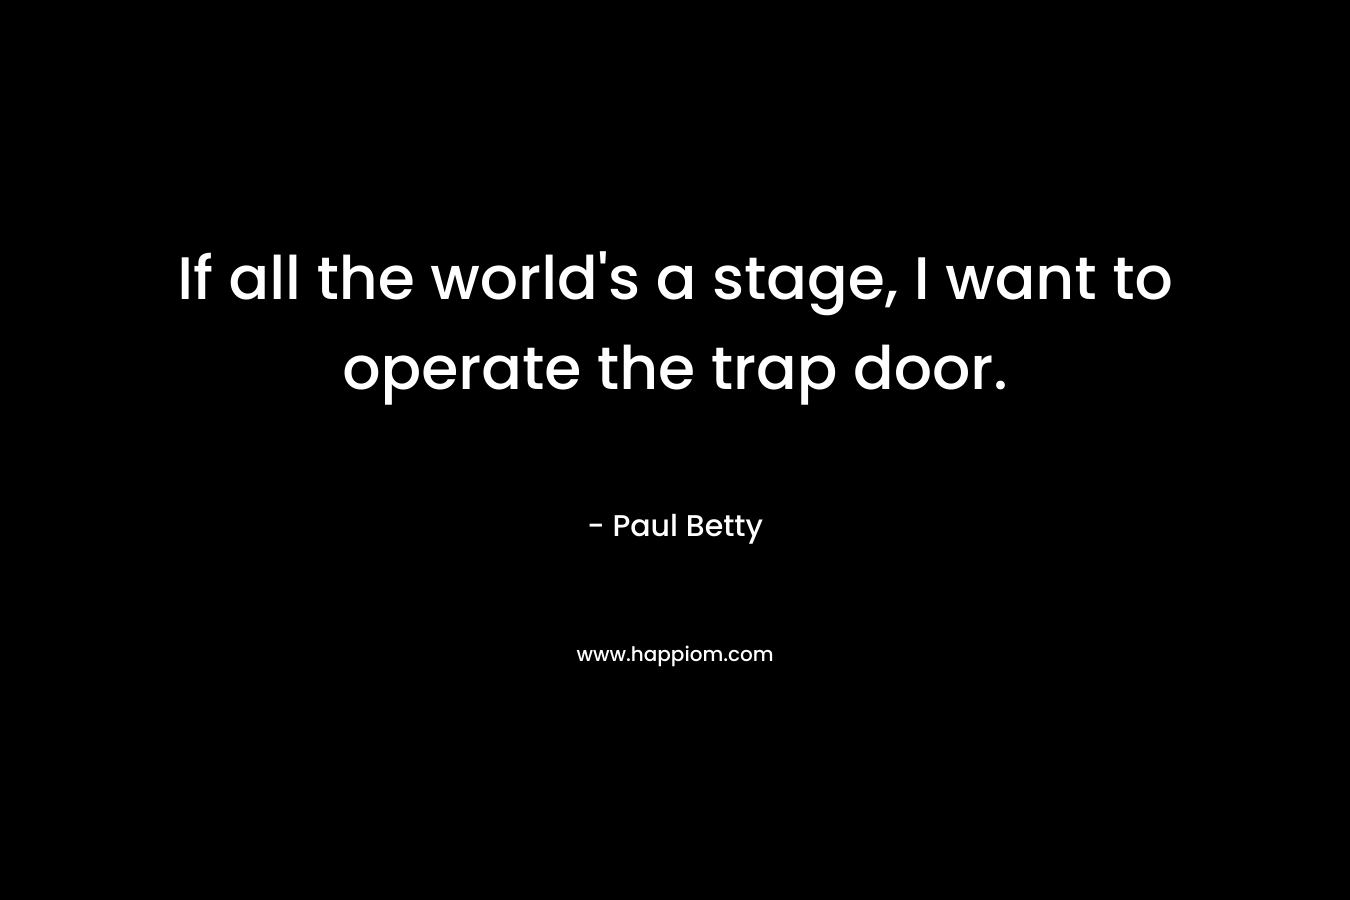 If all the world’s a stage, I want to operate the trap door. – Paul Betty